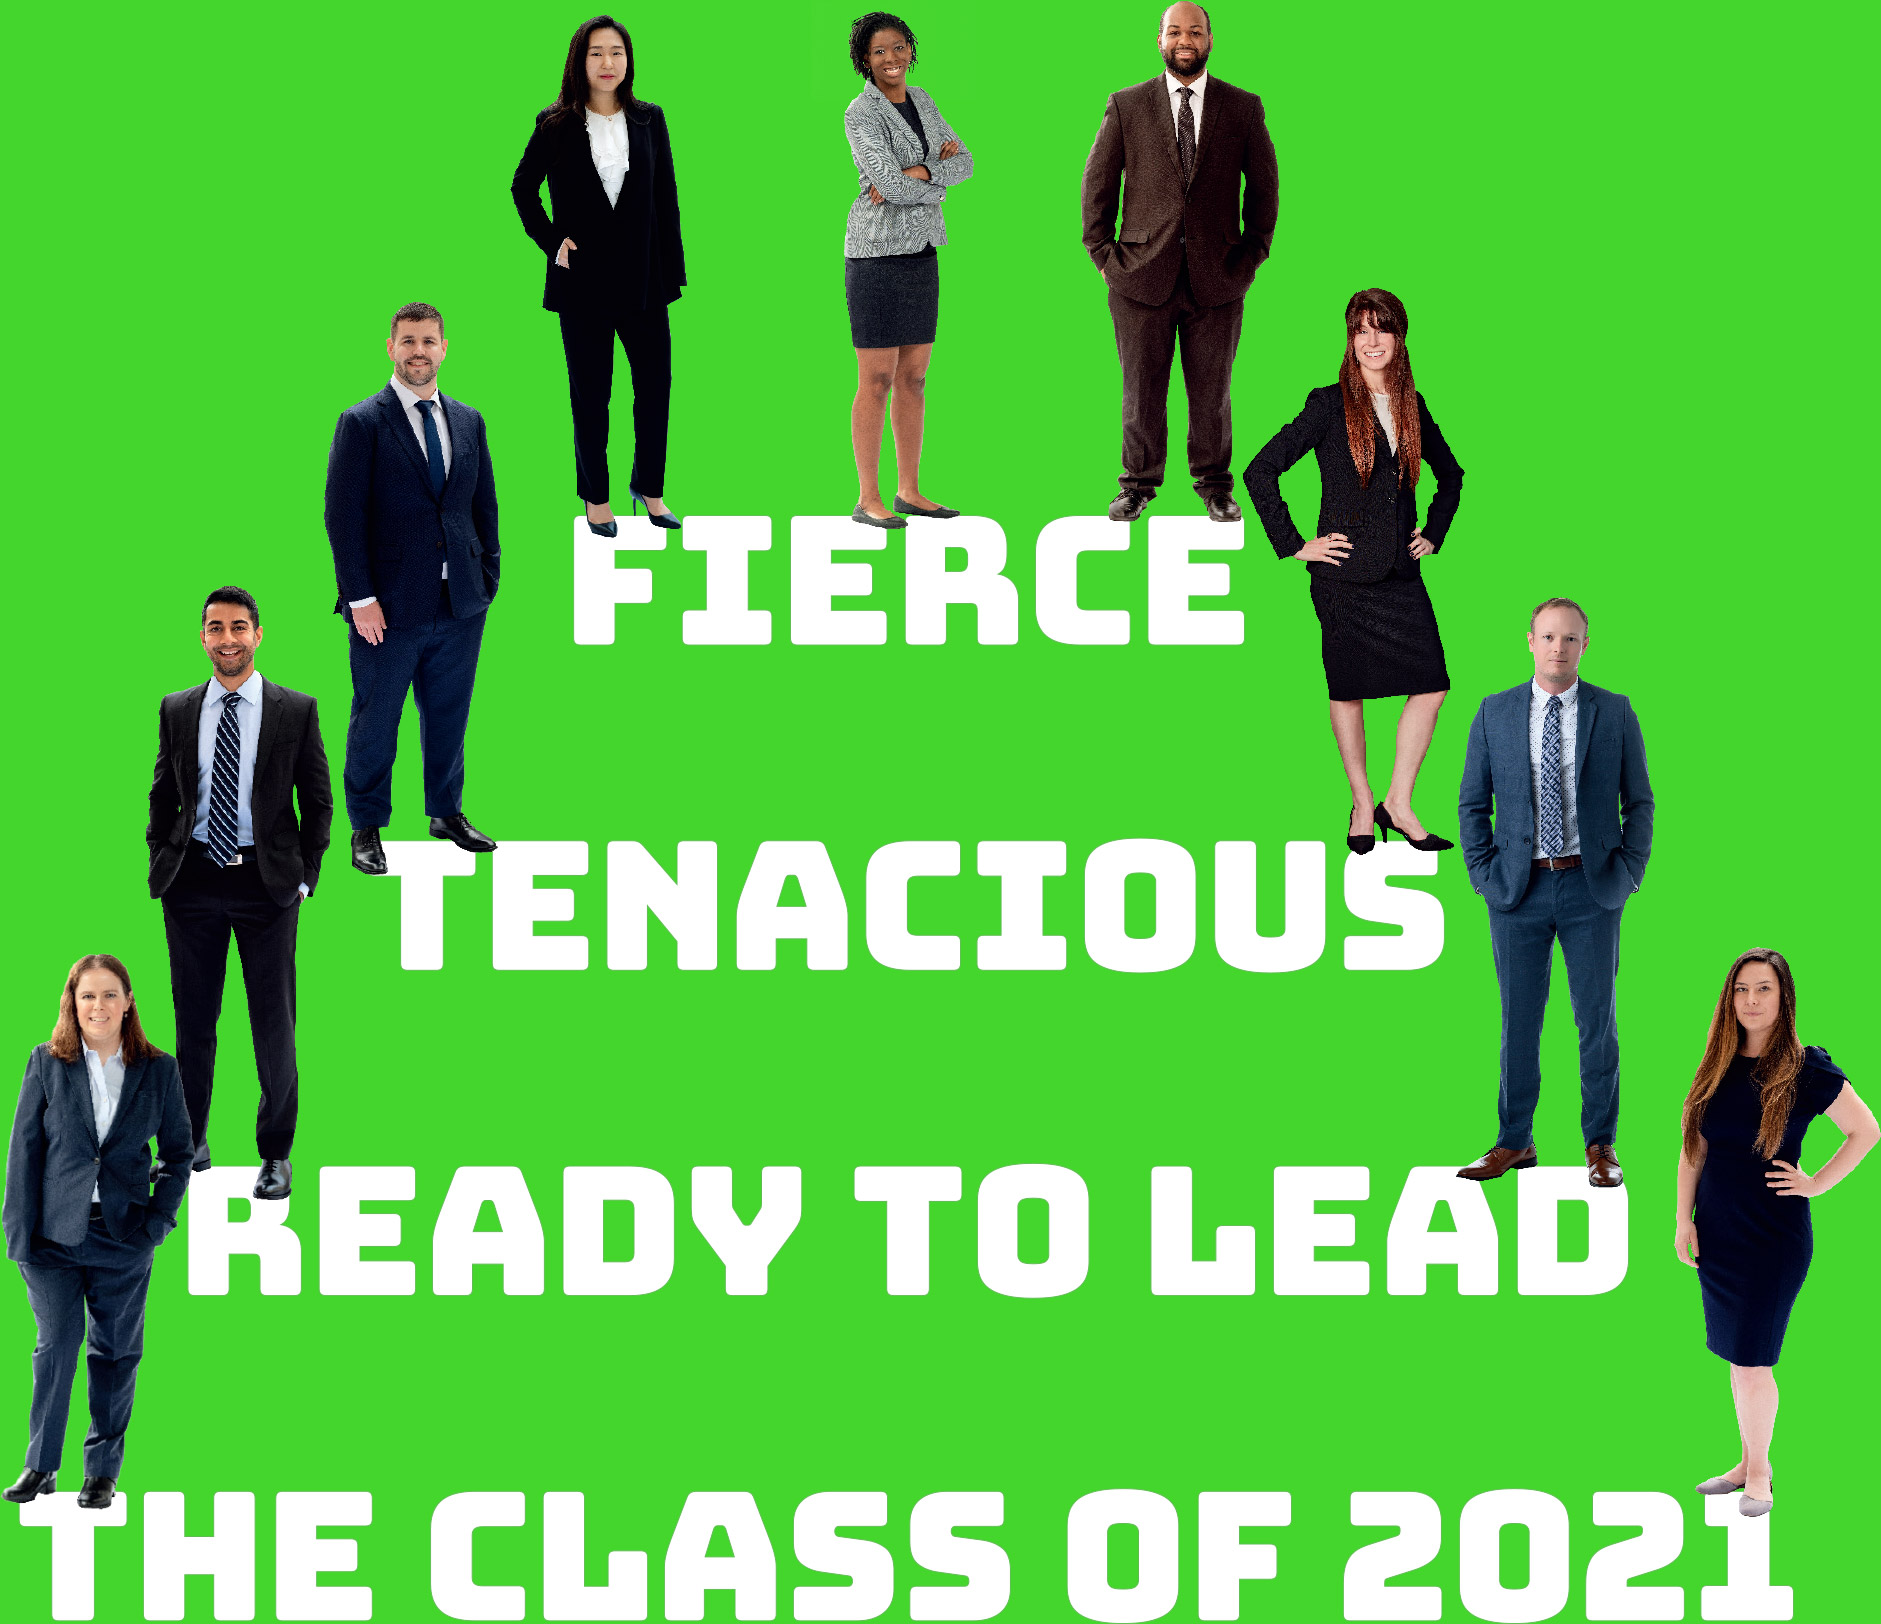 Fierce, Tenacious, Ready to Lead, The Class of 2021 graphic with students featured